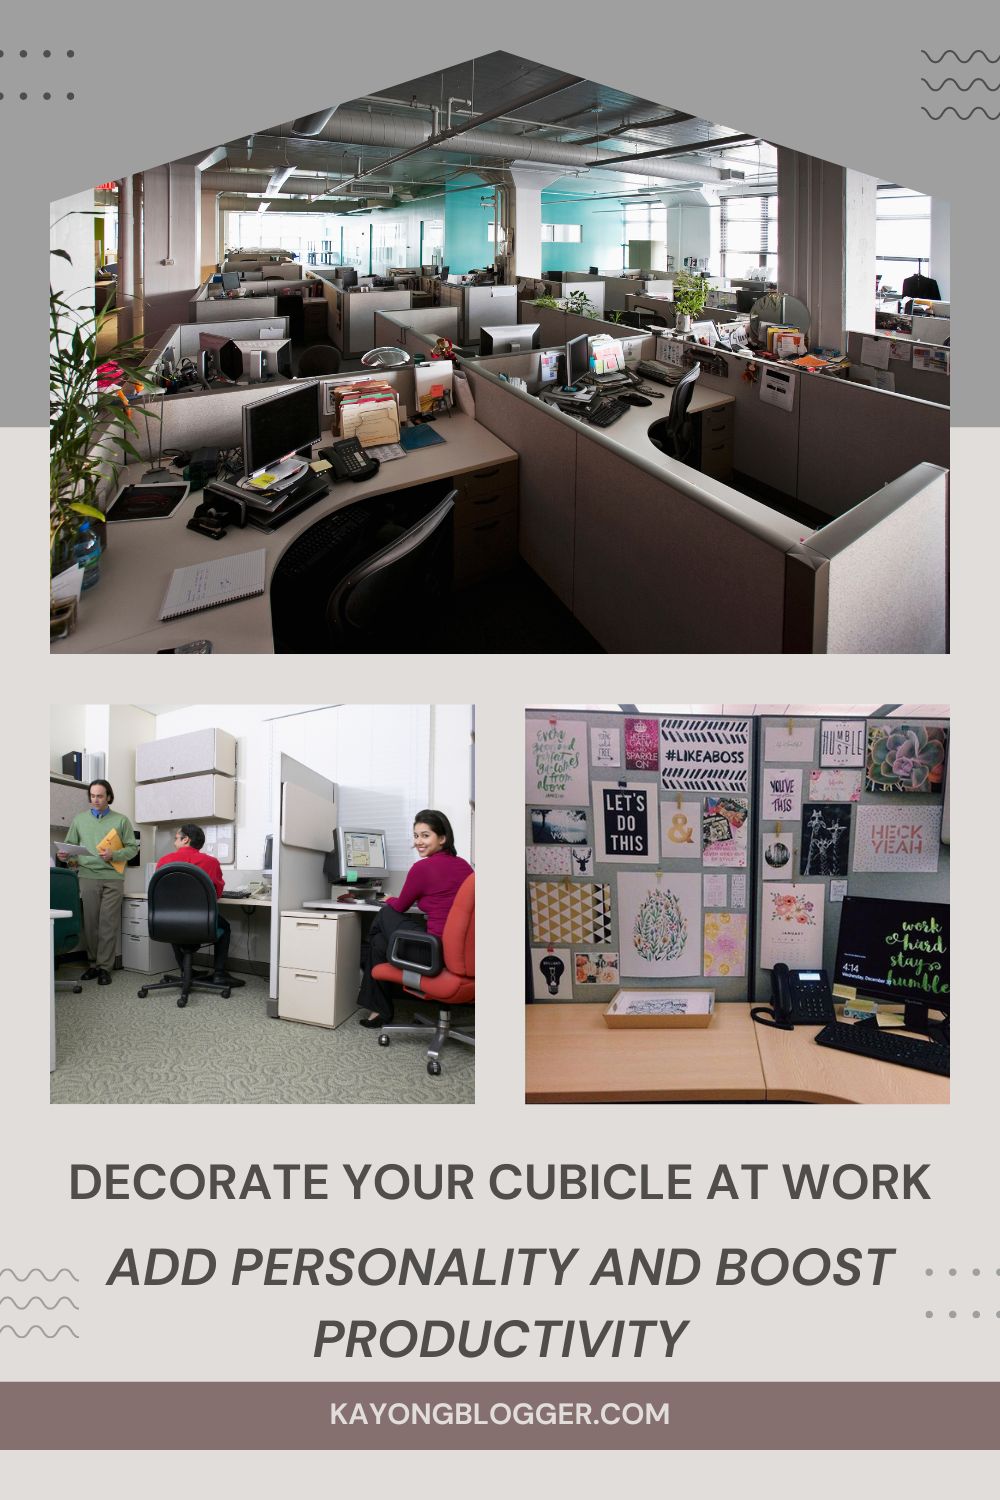 Decorate Your Cubicle at Work: Add Personality and Boost Productivity